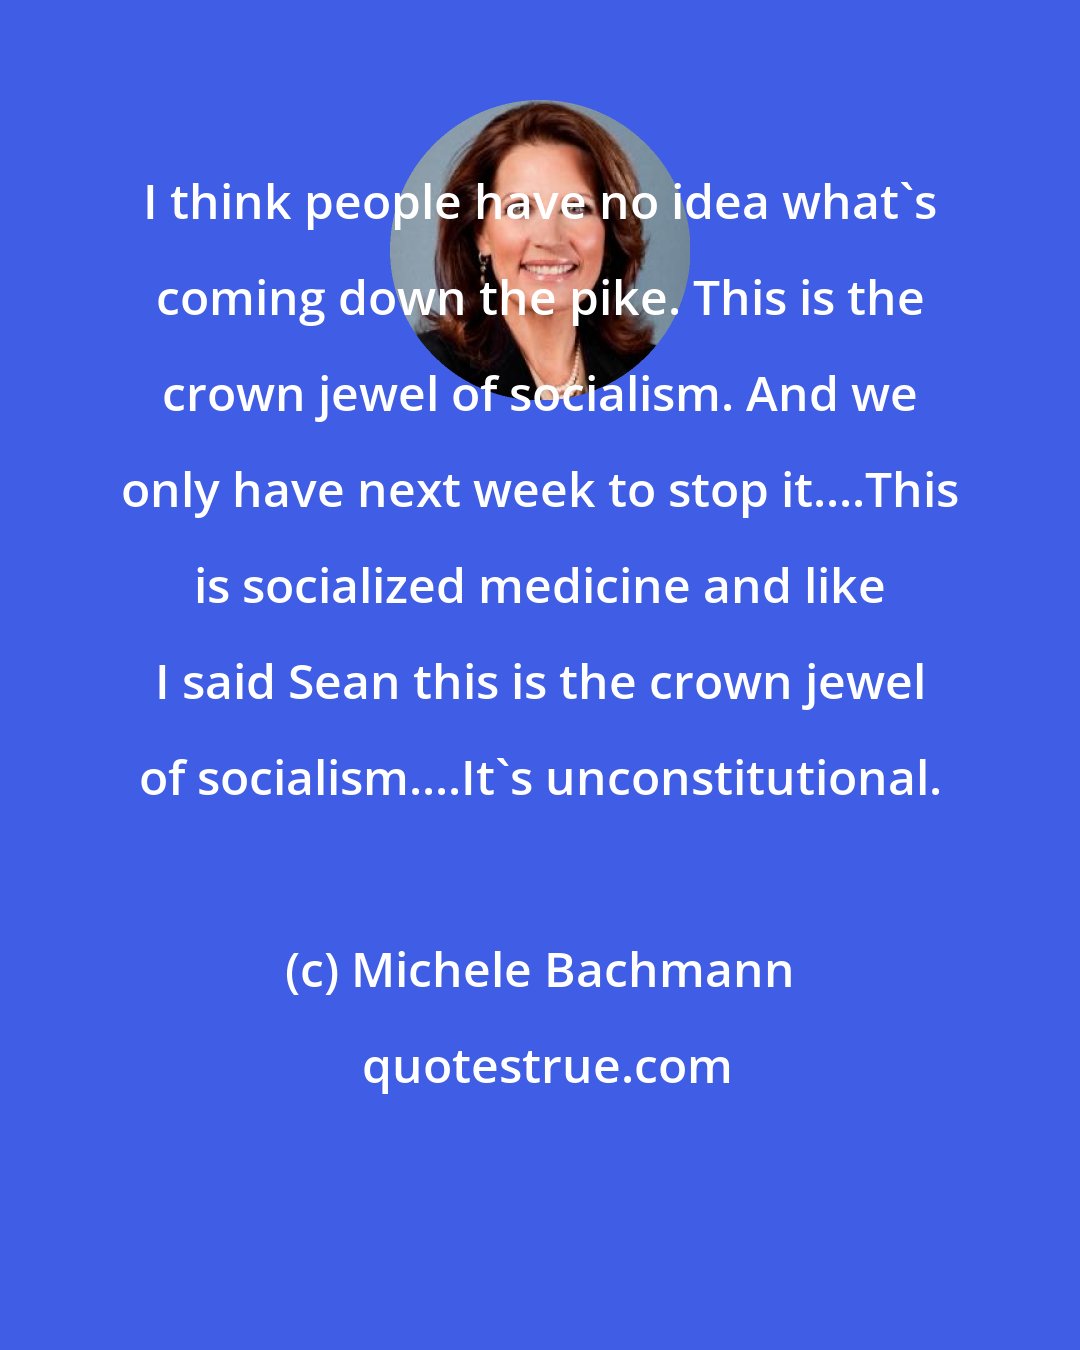 Michele Bachmann: I think people have no idea what's coming down the pike. This is the crown jewel of socialism. And we only have next week to stop it....This is socialized medicine and like I said Sean this is the crown jewel of socialism....It's unconstitutional.